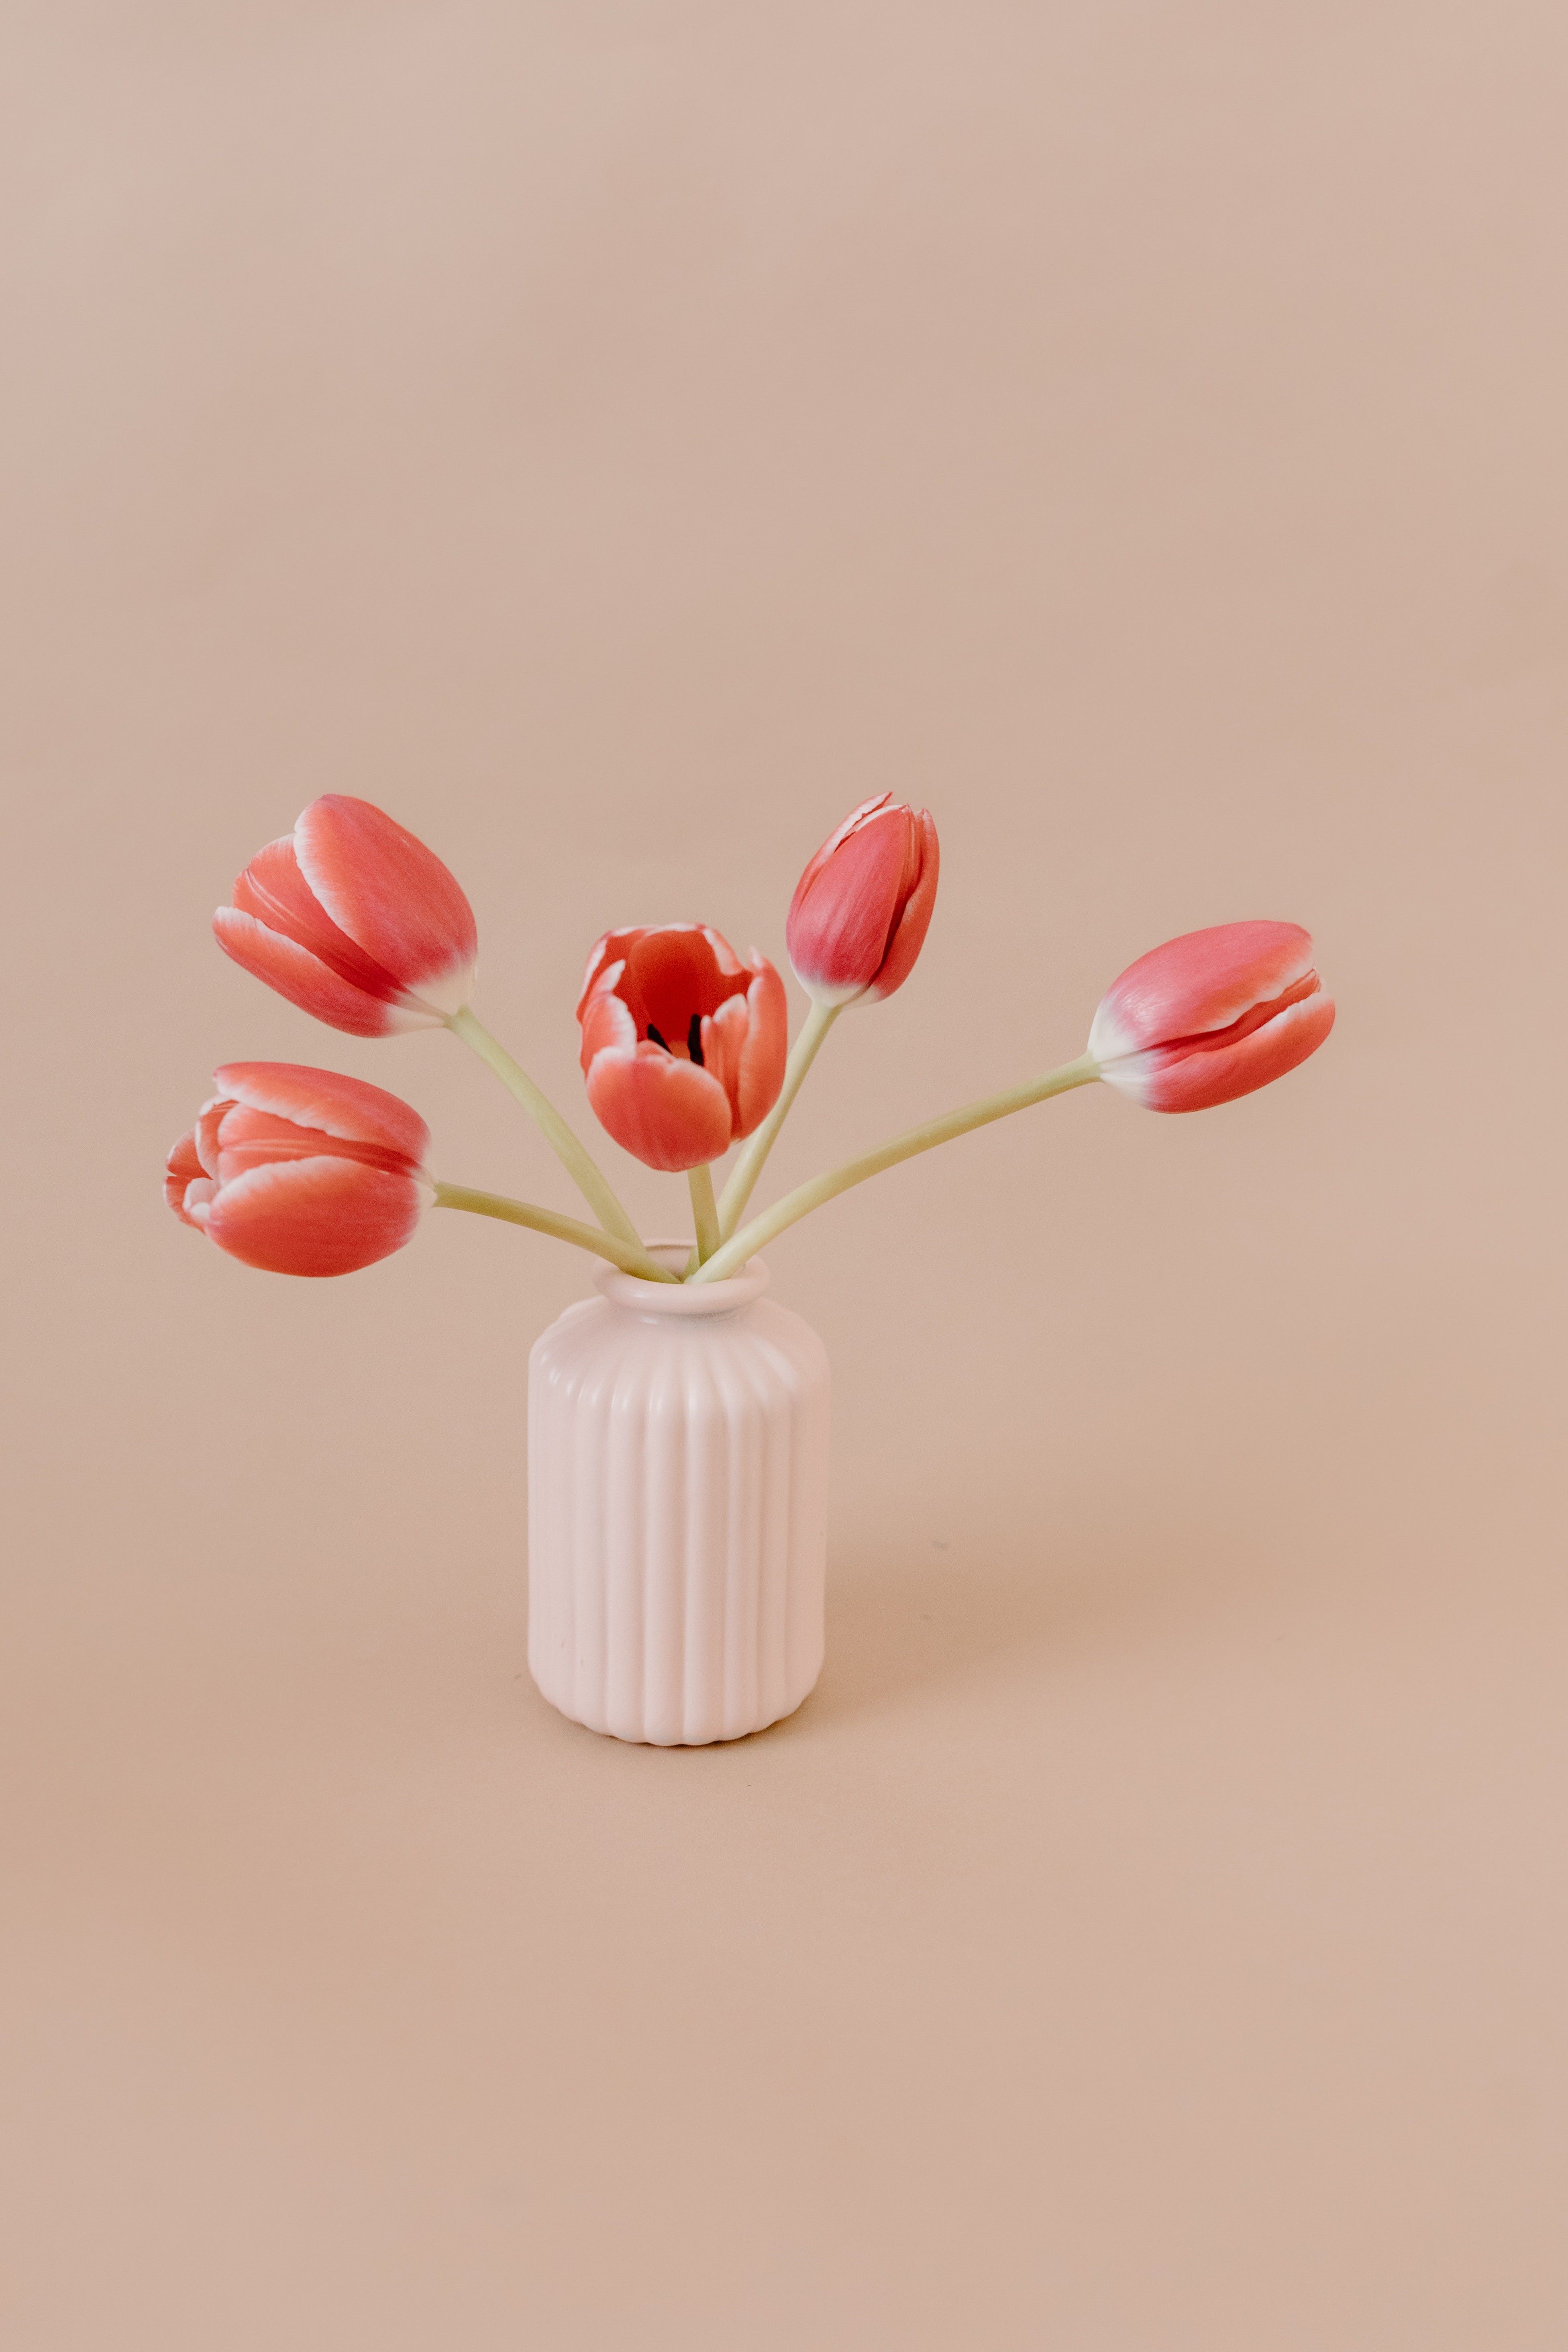 How To Care For Tulips So They Stay Fresher For Longer - Brit + Co